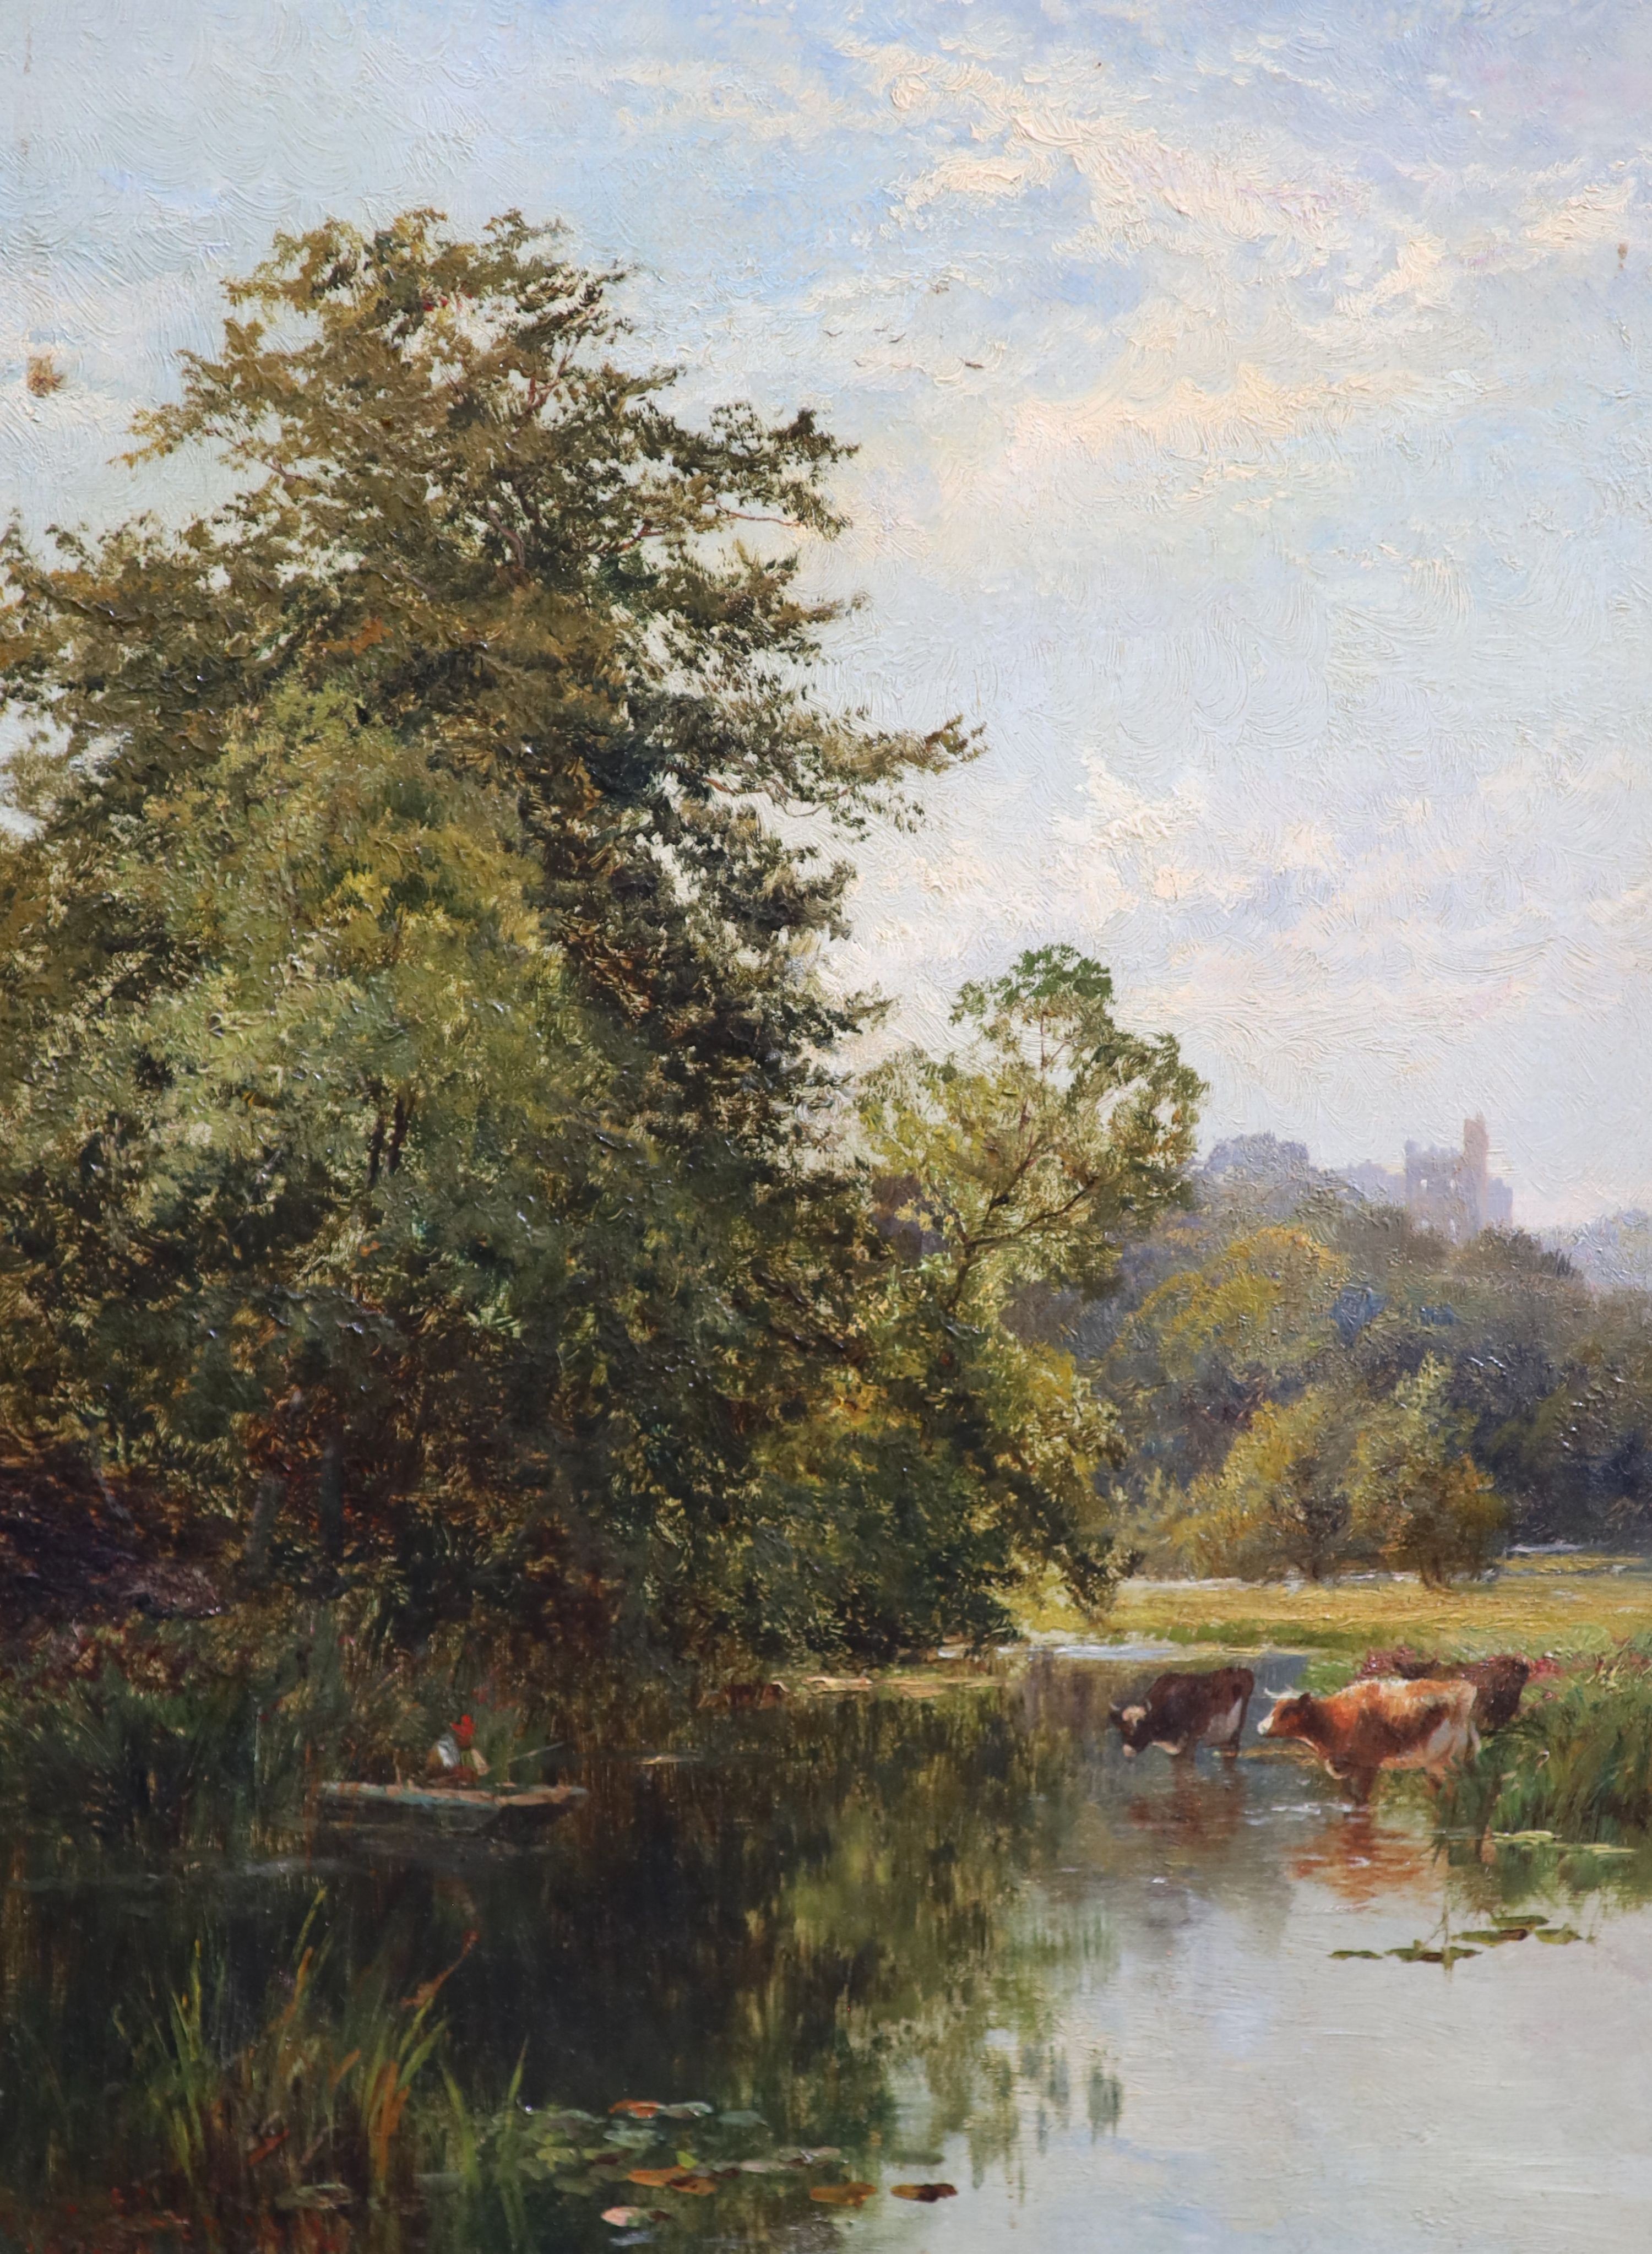 Walter Wallor Caffyn (1845-1898), Arundel Castle from the Meadows, Oil on canvas, 40 x 30cm.